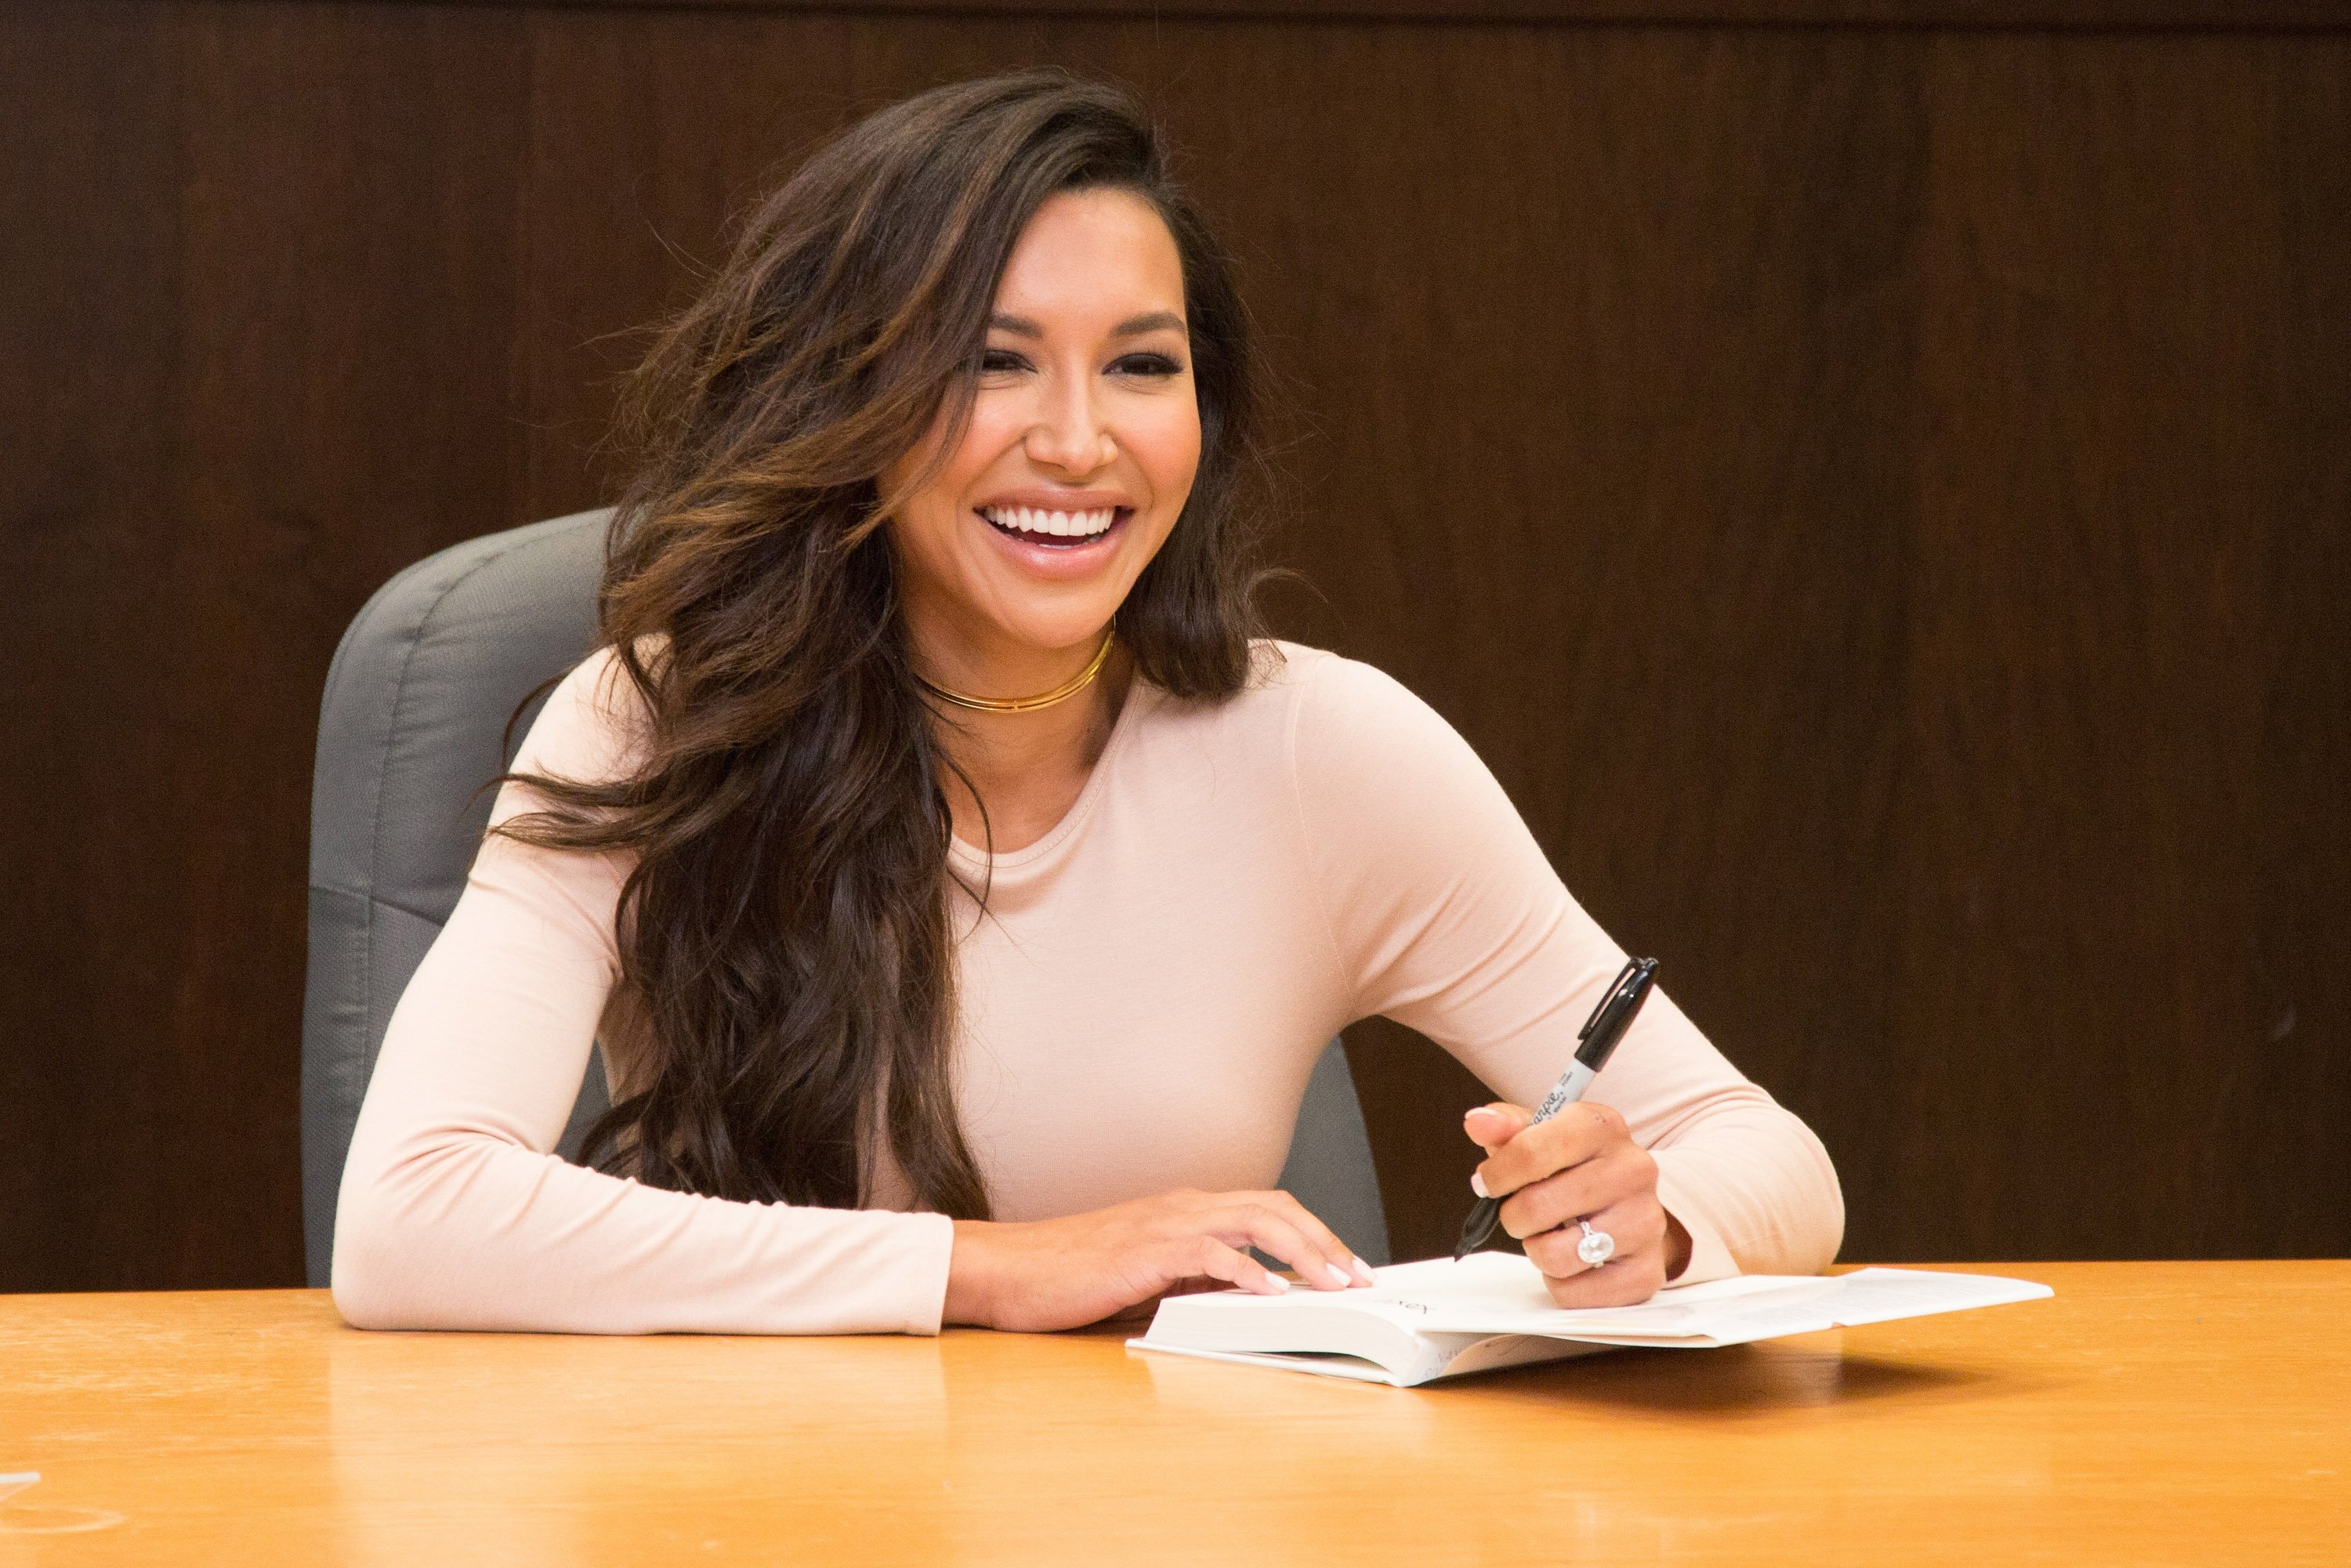 Naya Rivera pictured her book signing for "Sorry Not Sorry." 2016, California. | Photo: Getty Images 